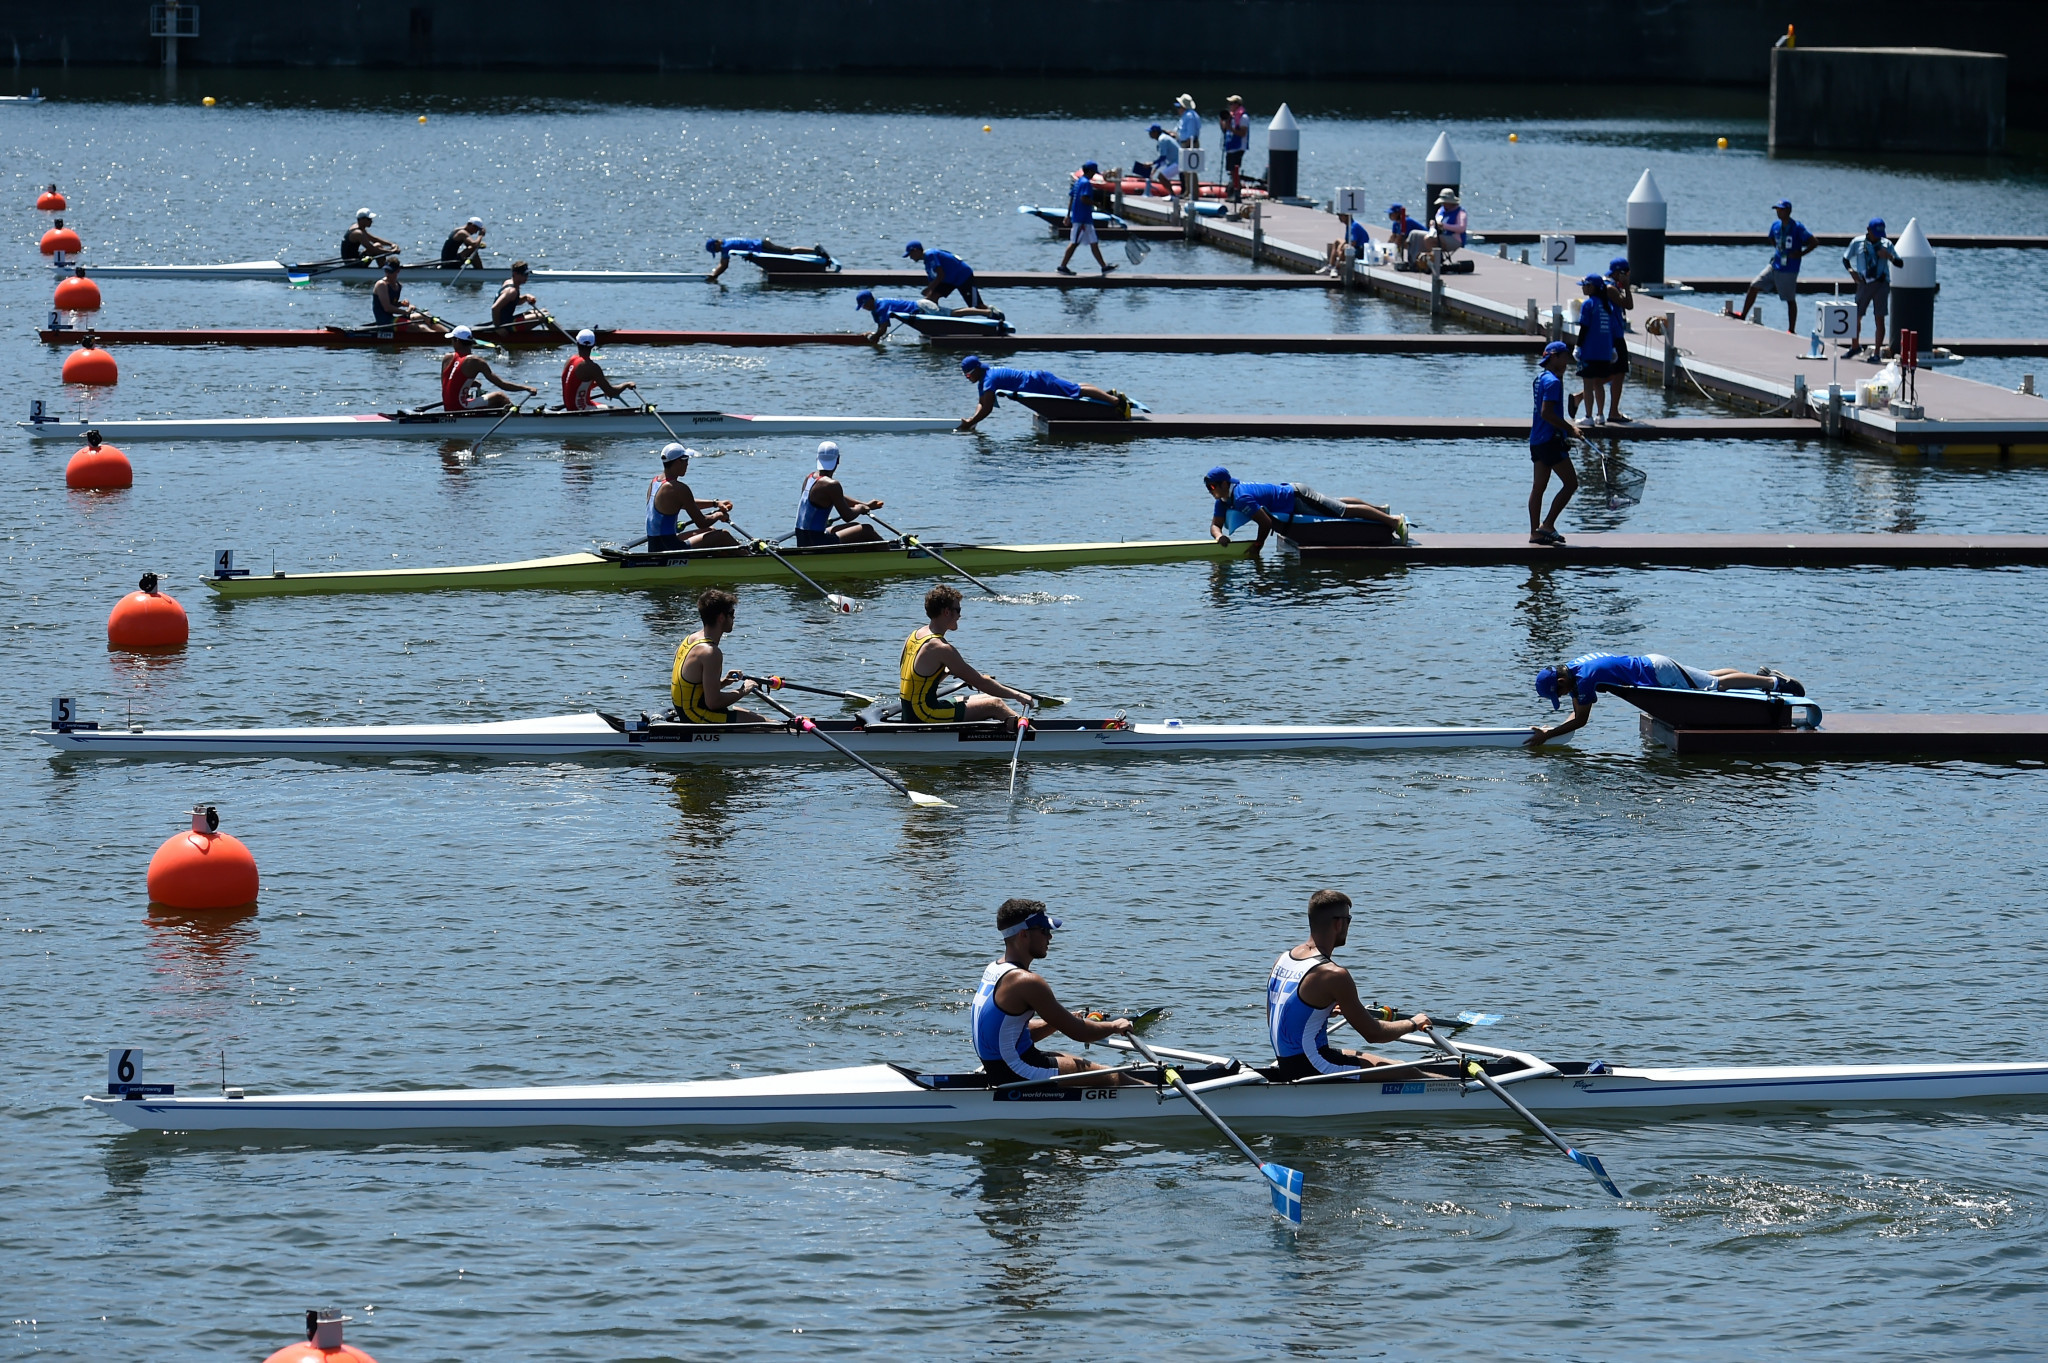 The 2019 World Rowing Junior Championships acted as a test event for Tokyo 2020 before the COVID-19 pandemic ©Getty Images